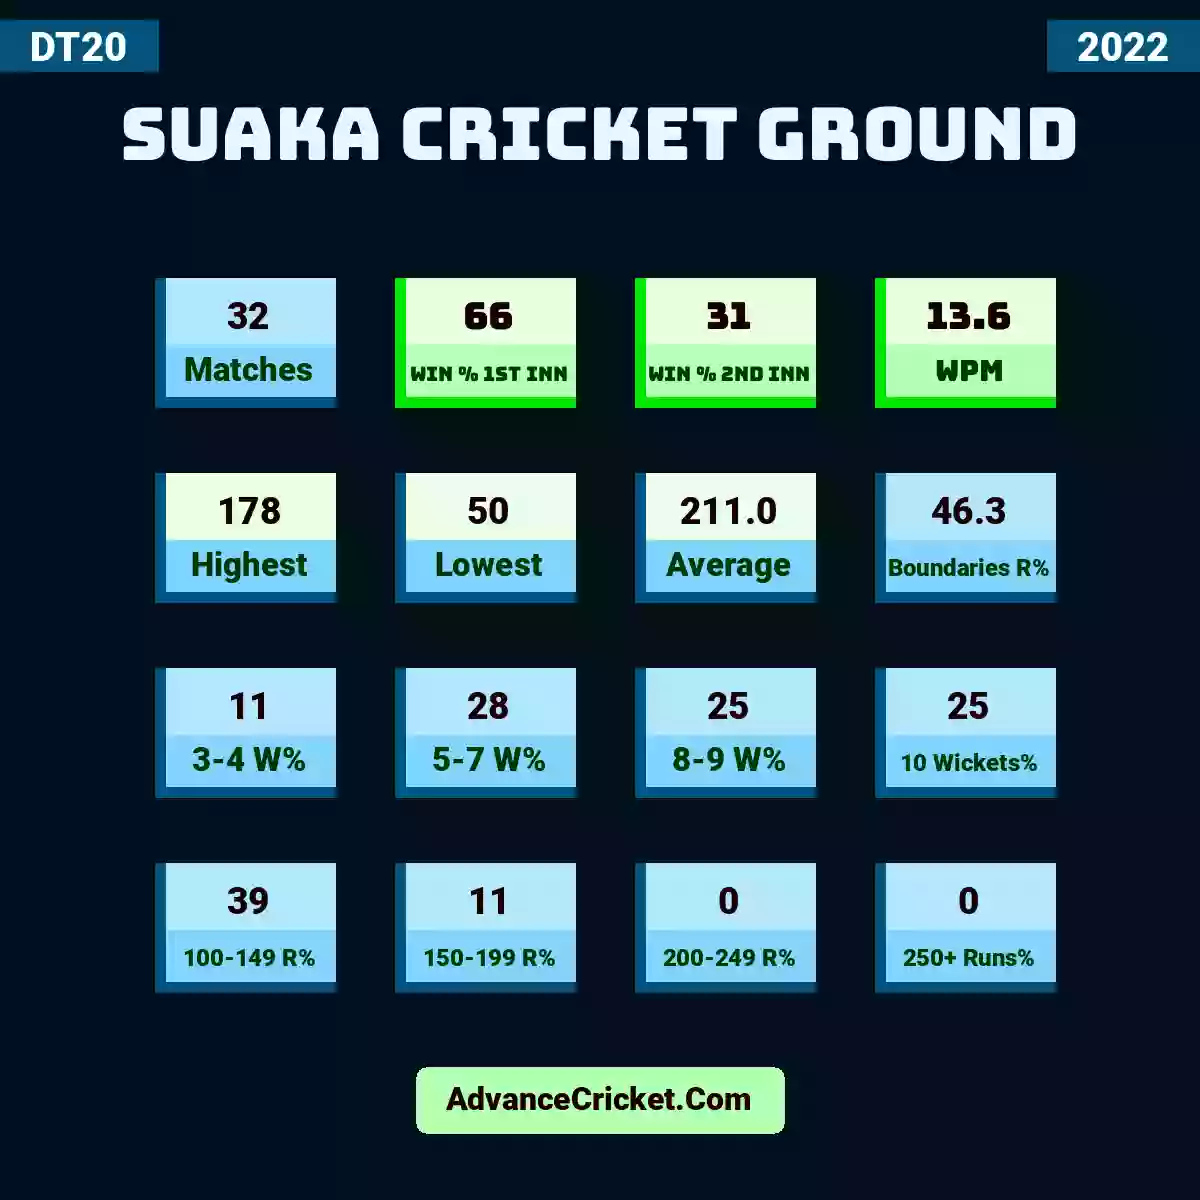 Image showing Suaka Cricket Ground with Matches: 32, Win % 1st Inn: 66, Win % 2nd Inn: 31, WPM: 13.6, Highest: 178, Lowest: 50, Average: 211.0, Boundaries R%: 46.3, 3-4 W%: 11, 5-7 W%: 28, 8-9 W%: 25, 10 Wickets%: 25, 100-149 R%: 39, 150-199 R%: 11, 200-249 R%: 0, 250+ Runs%: 0.